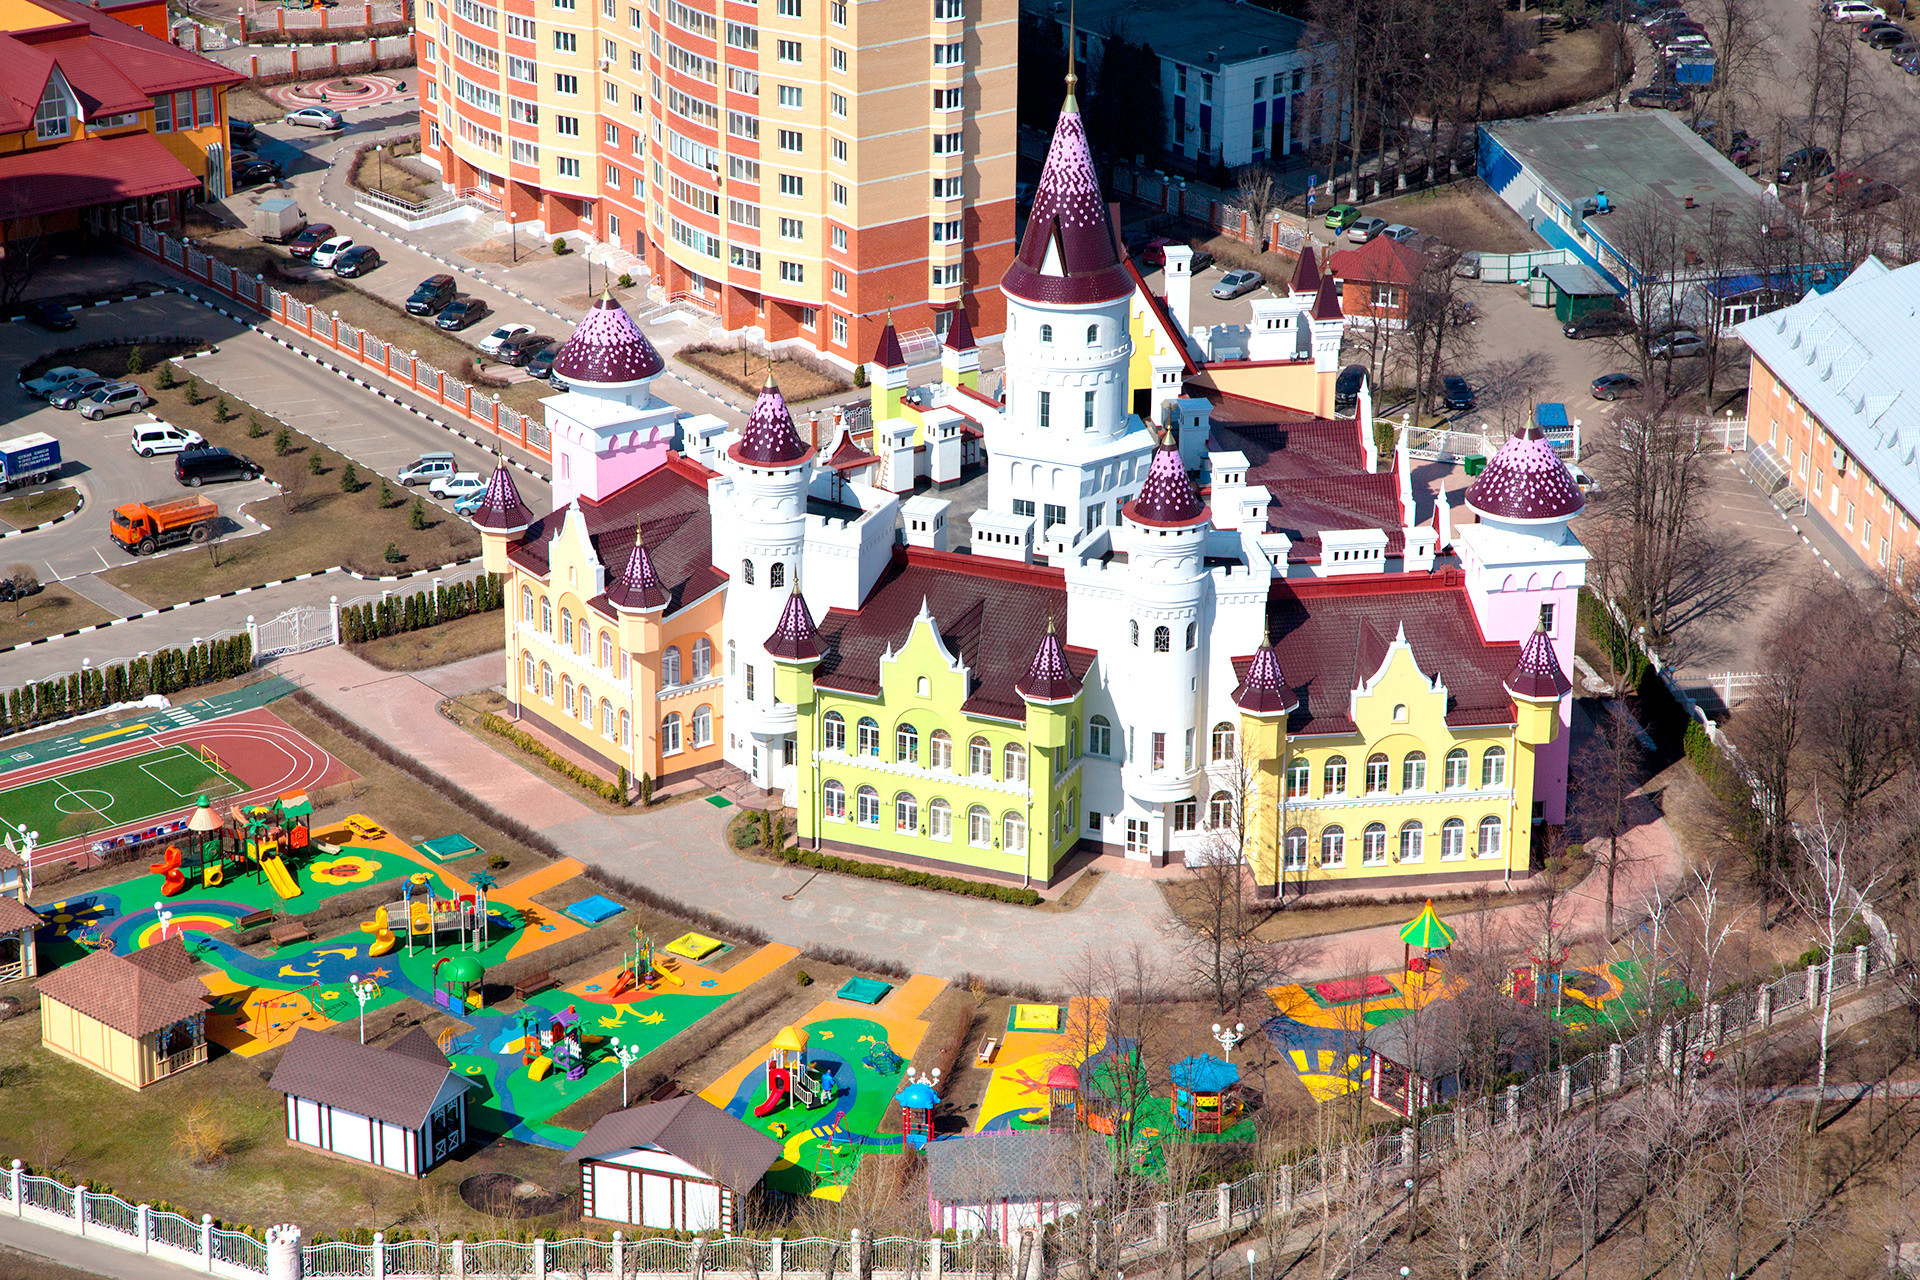 A private kindergarten news Moscow.